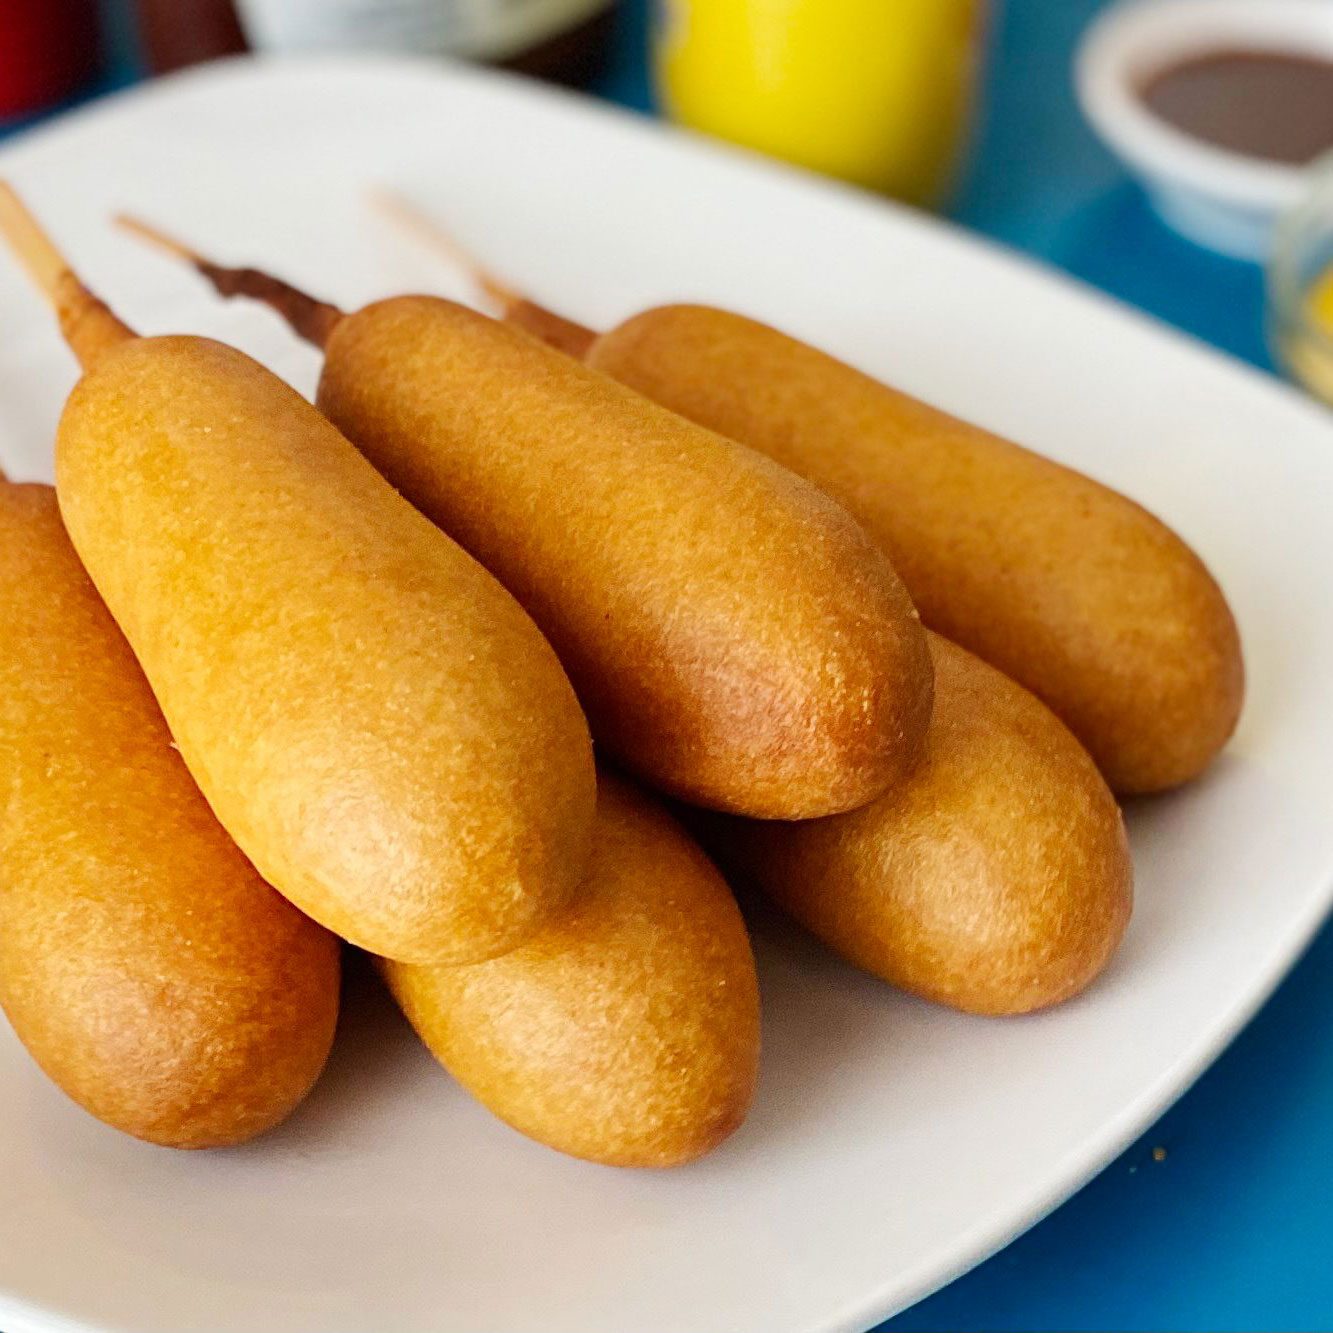 Vegan Korean Corn Dogs with Cheese! – Mary's Test Kitchen